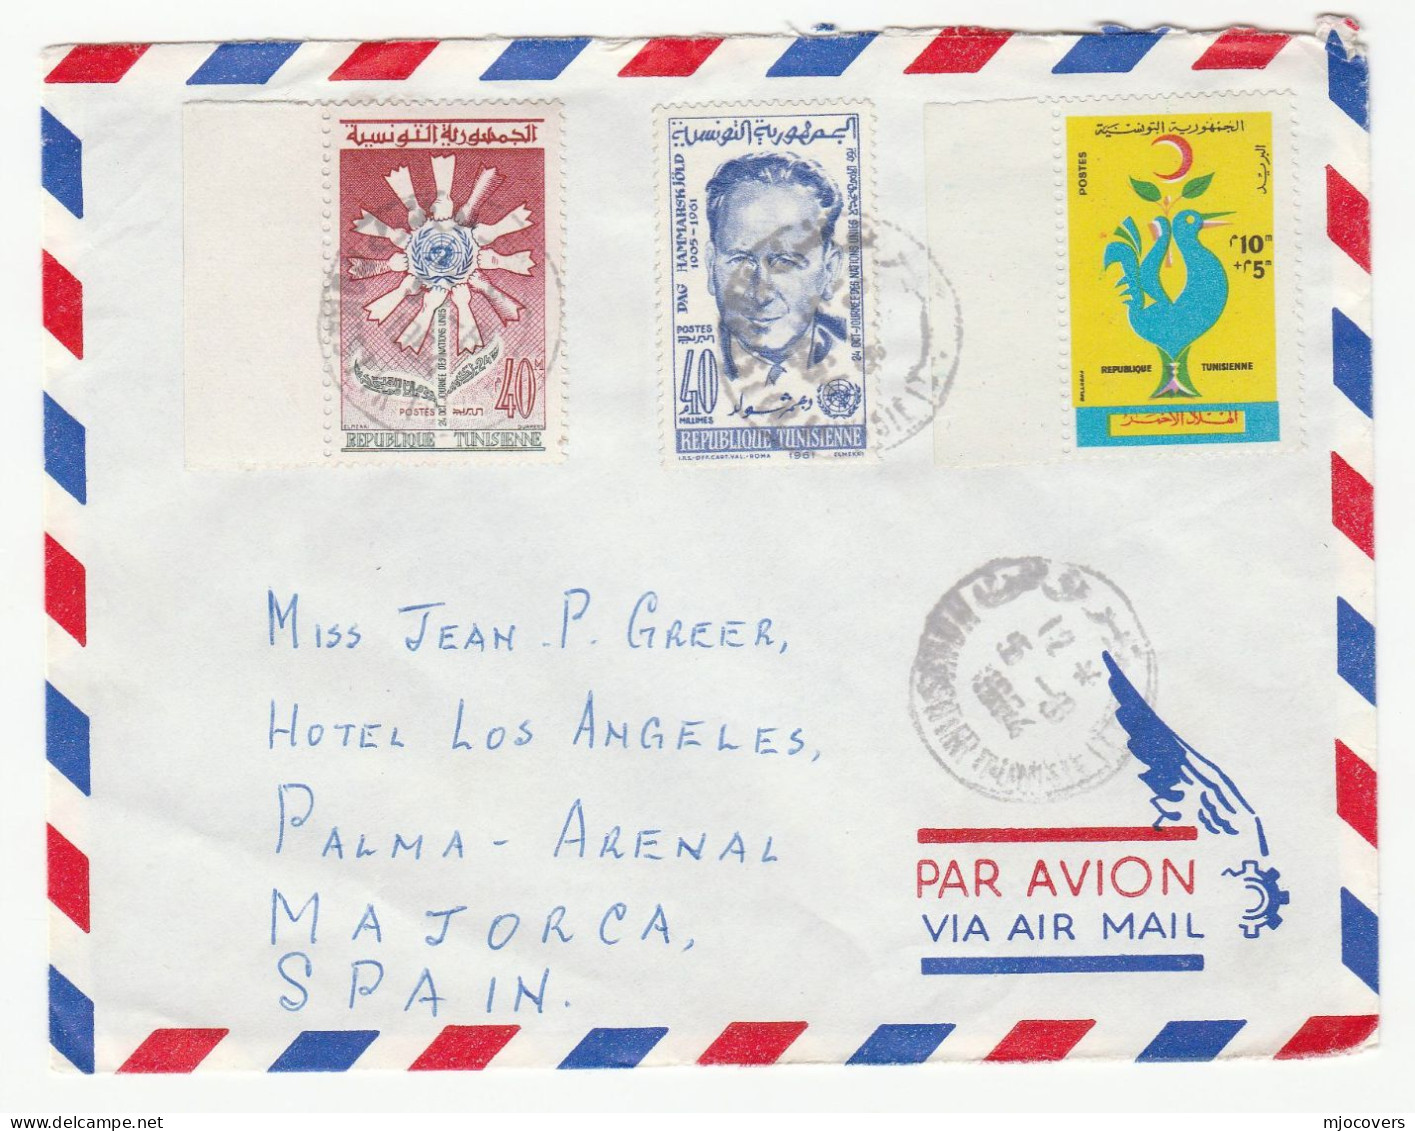 RED CRESCENT 1964 TUNISIA Stamps COVER Un United Nations  Red Cross Air Mail To Spain - Tunisia